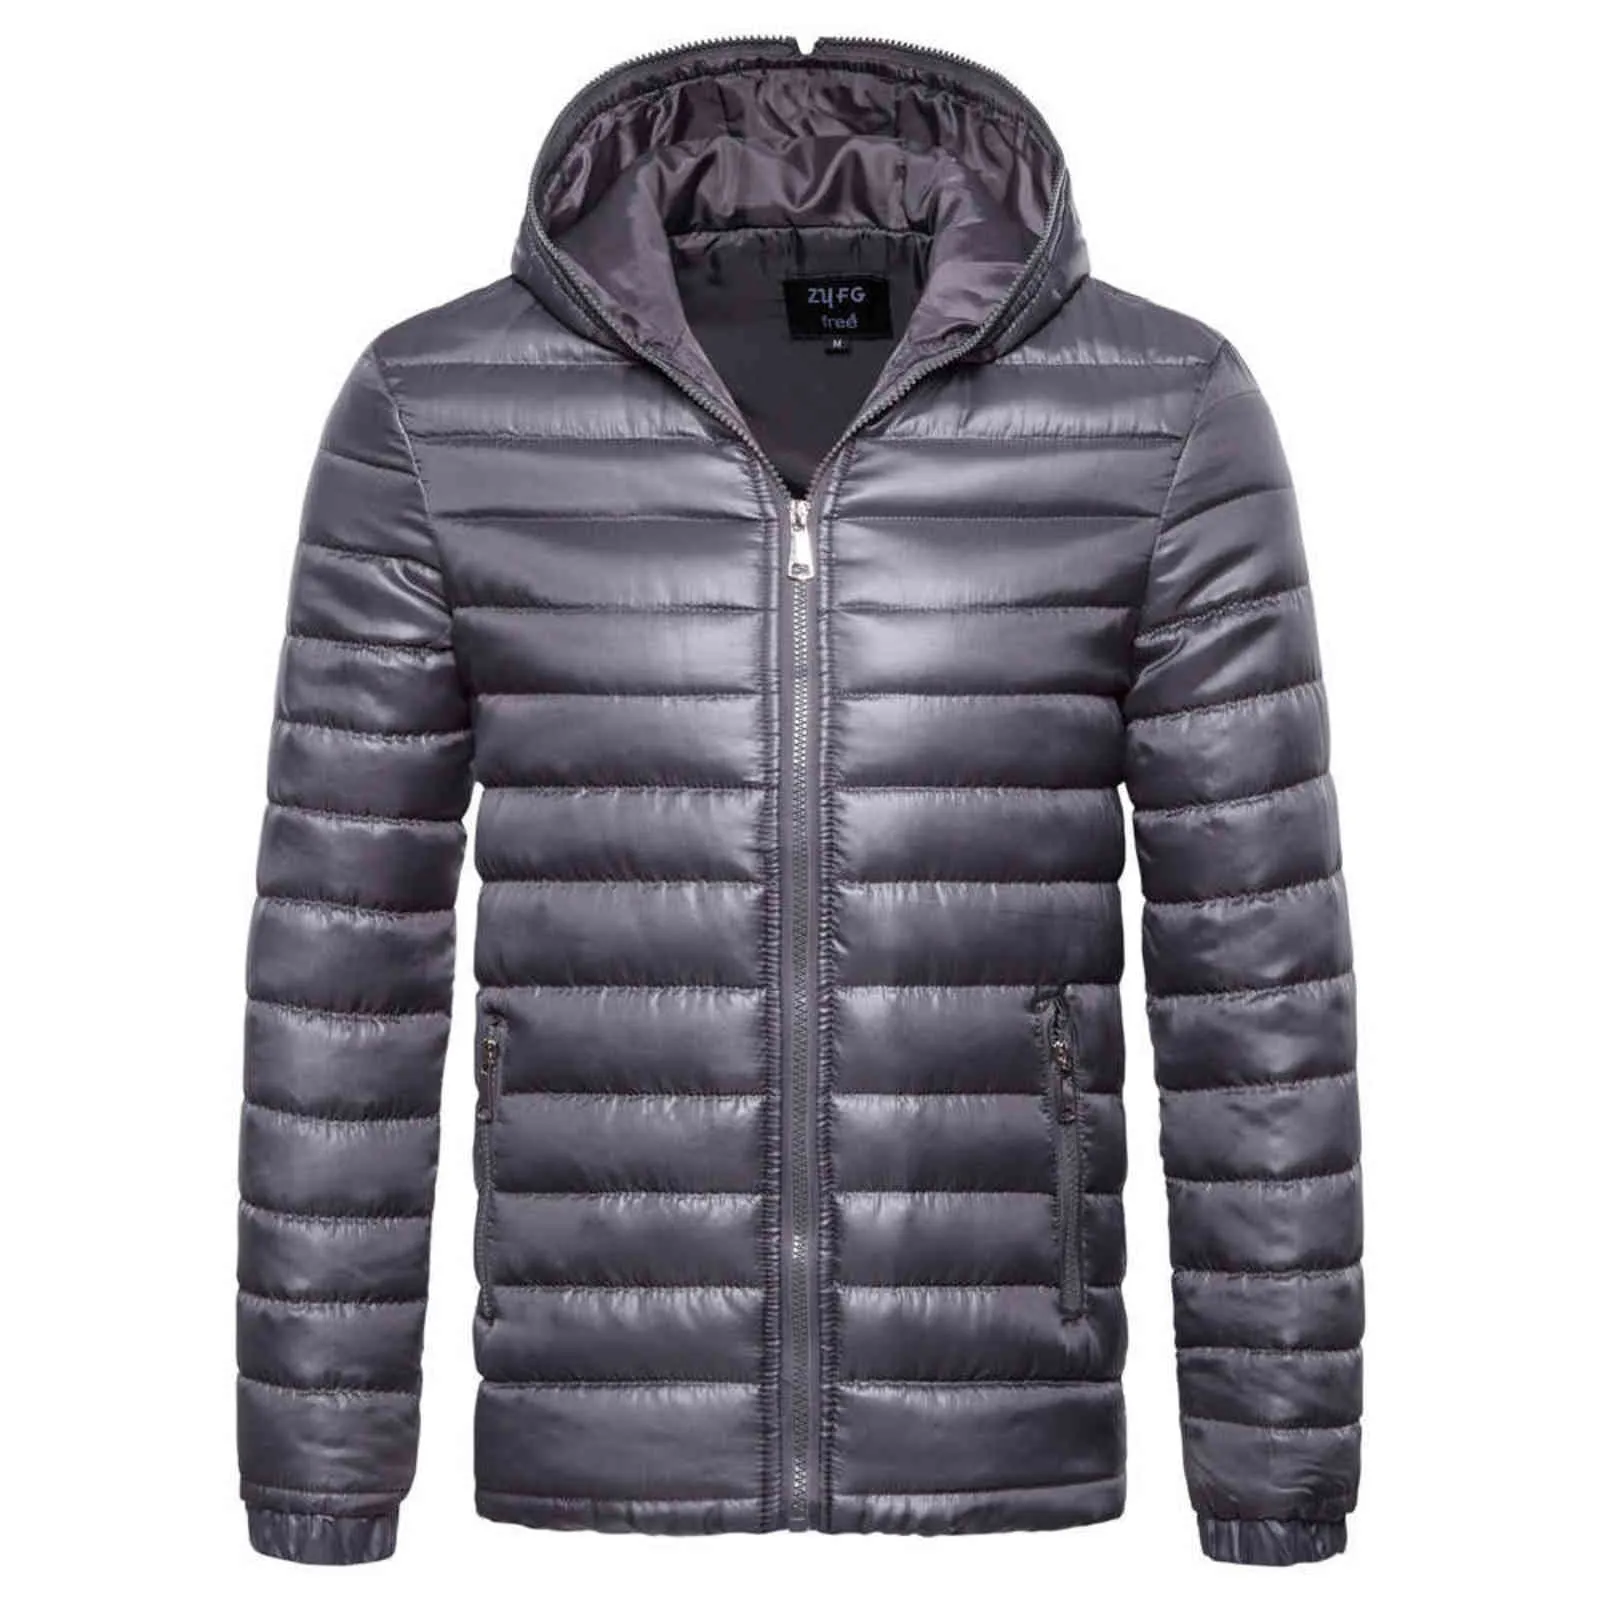 2021 foreign trade autumn new style men's cotton-padded jacket hooded cotton-padded jacket men's cotton-padded jacket dow G1108